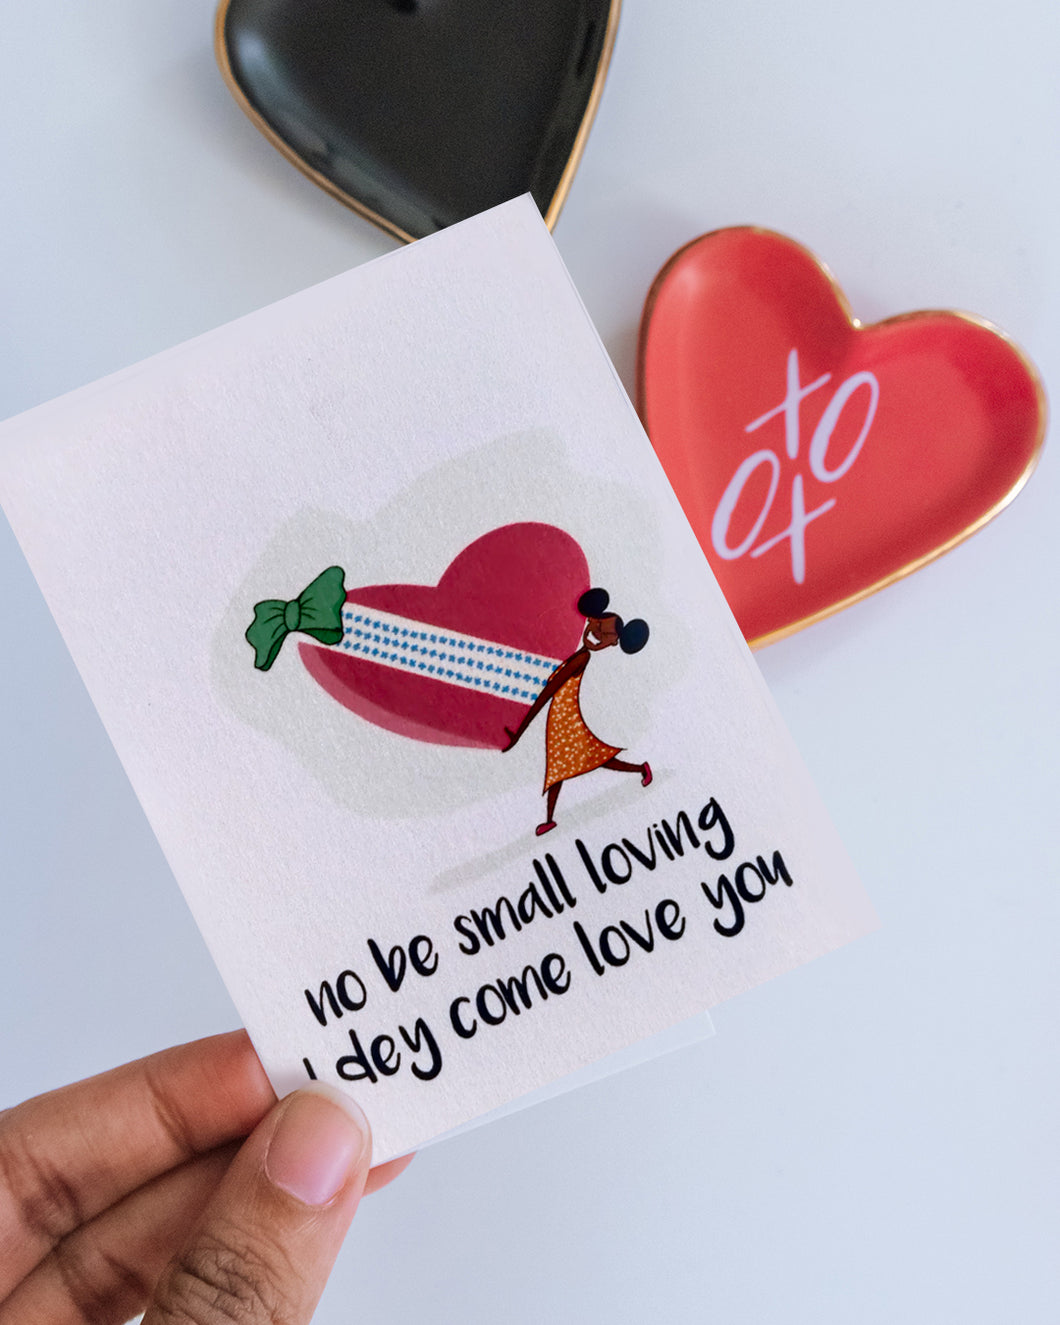 Love Themed Gift Card - No be small loving (She)